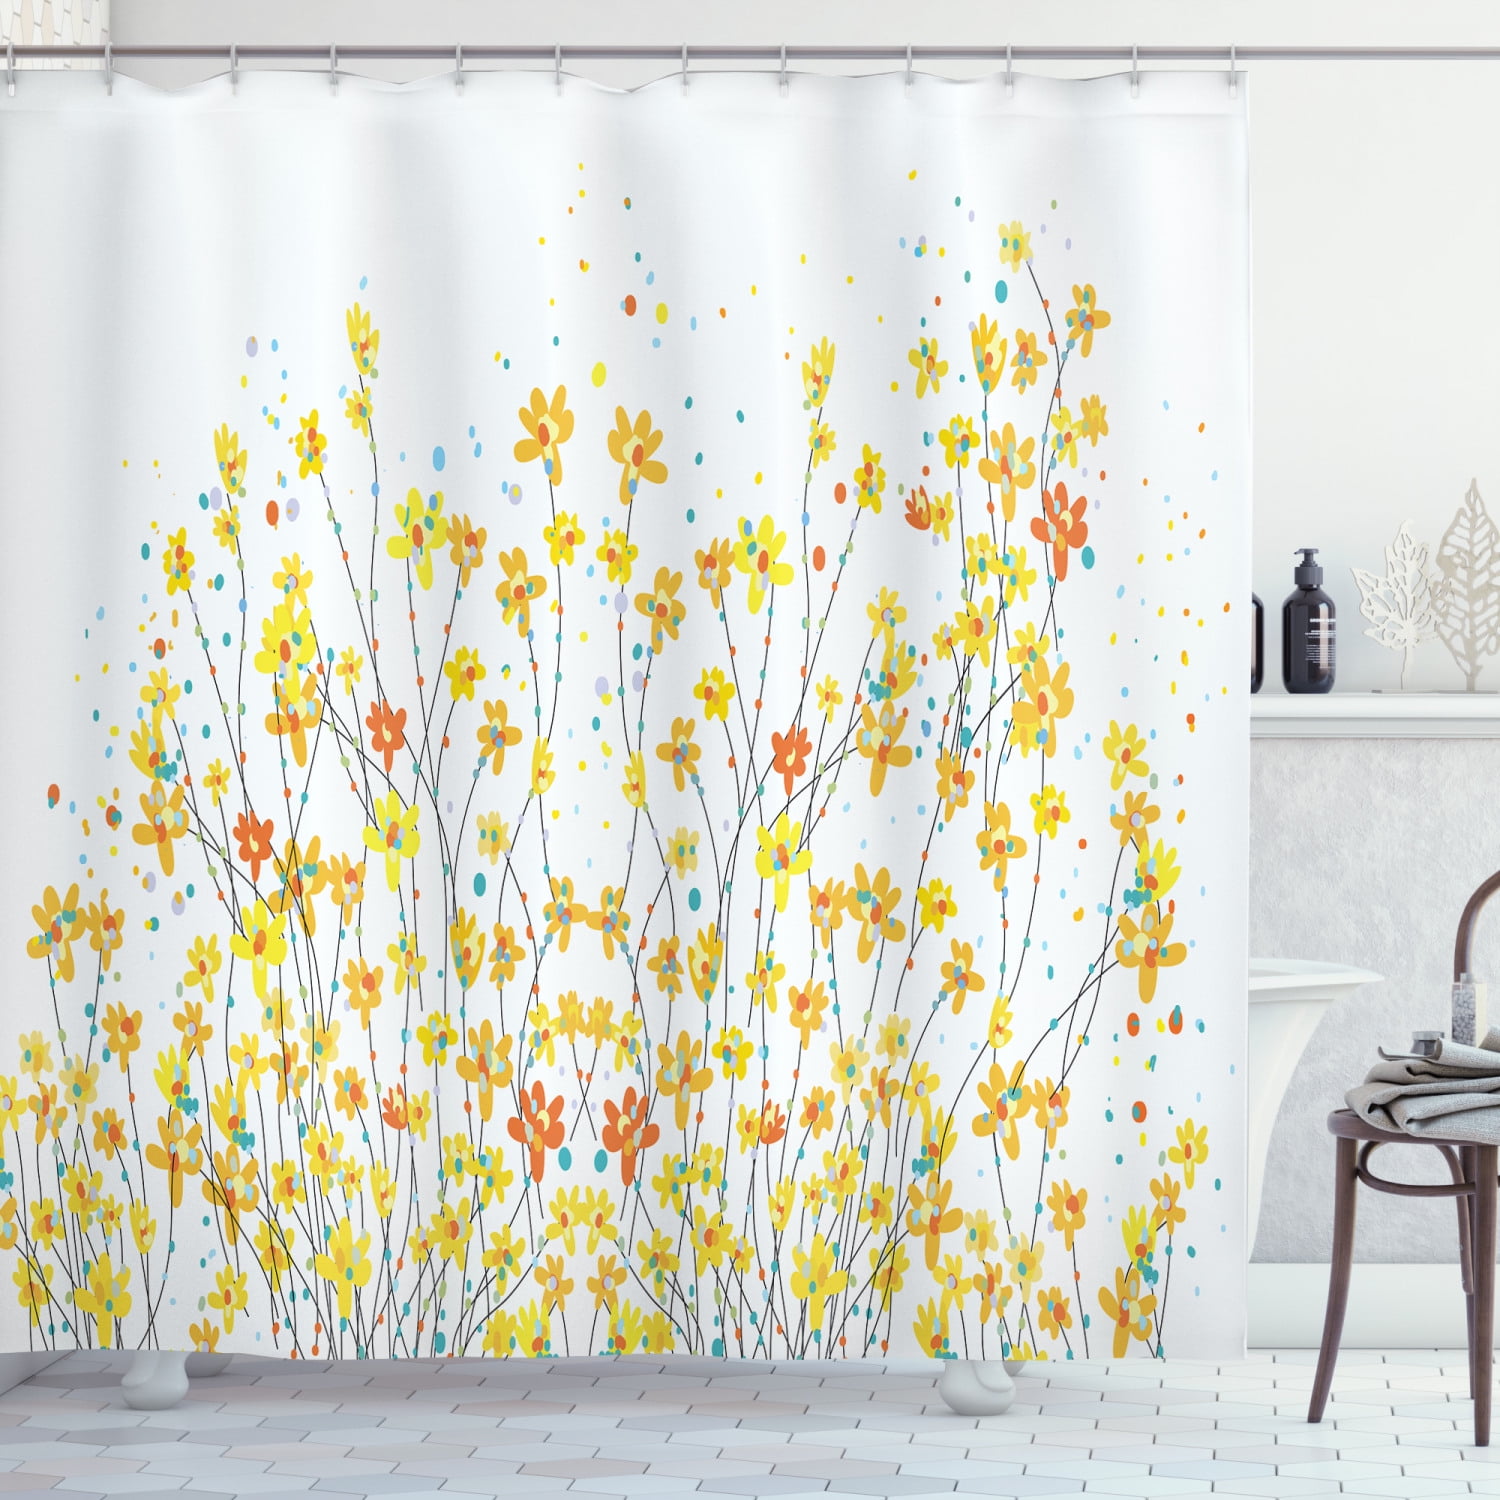 Calla Lily Flower and Dragonfly Bathroom Fabric Shower Curtain and Hooks 71inch 